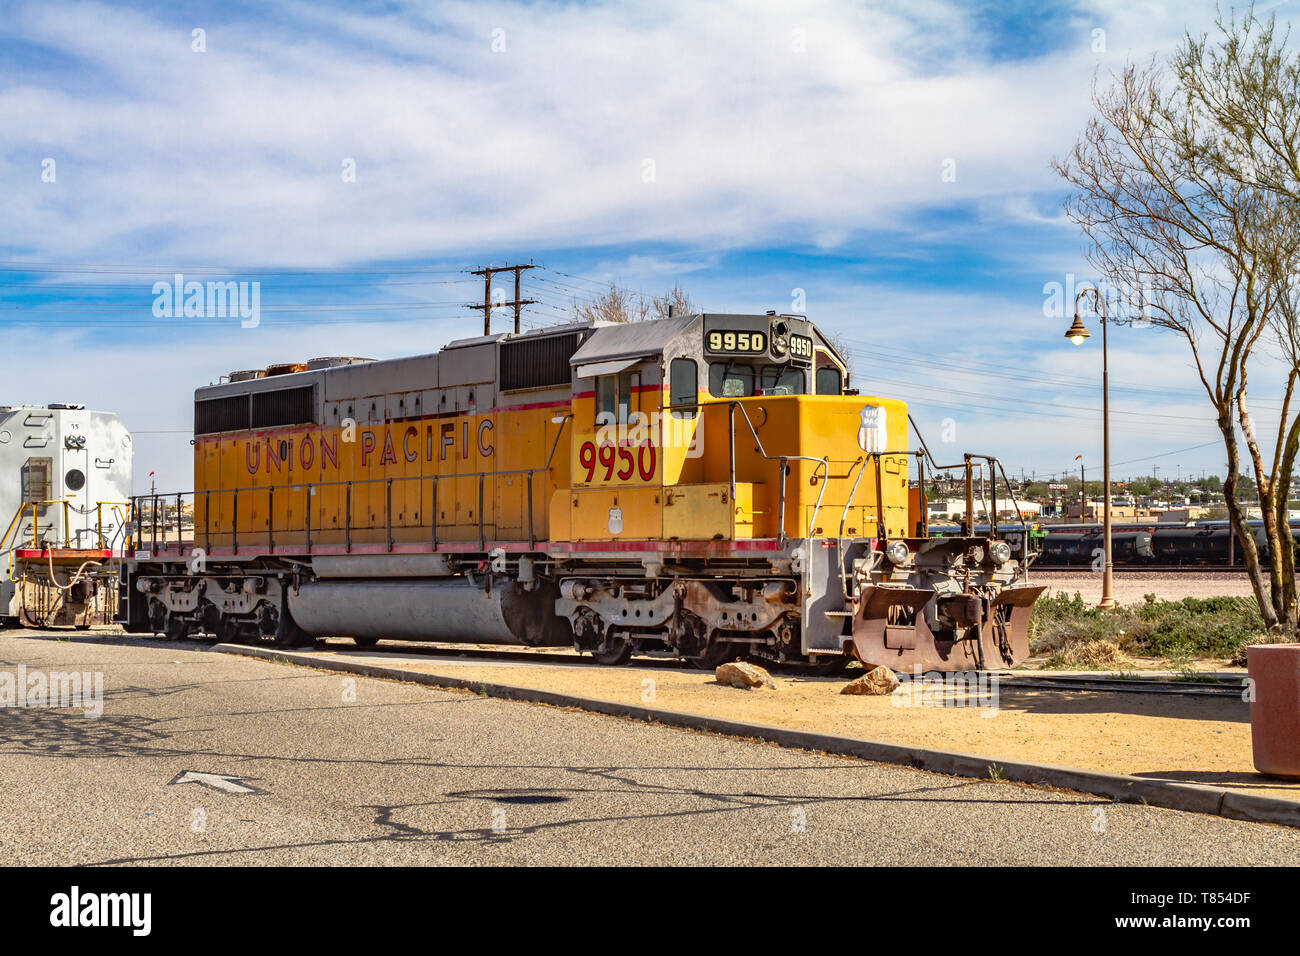 Barstow, CA / USA – April 14, 2019: Union Pacific railroad engine number 9950 at the Western America Railroad Museum located at the Barstow Harvey Hou Stock Photo